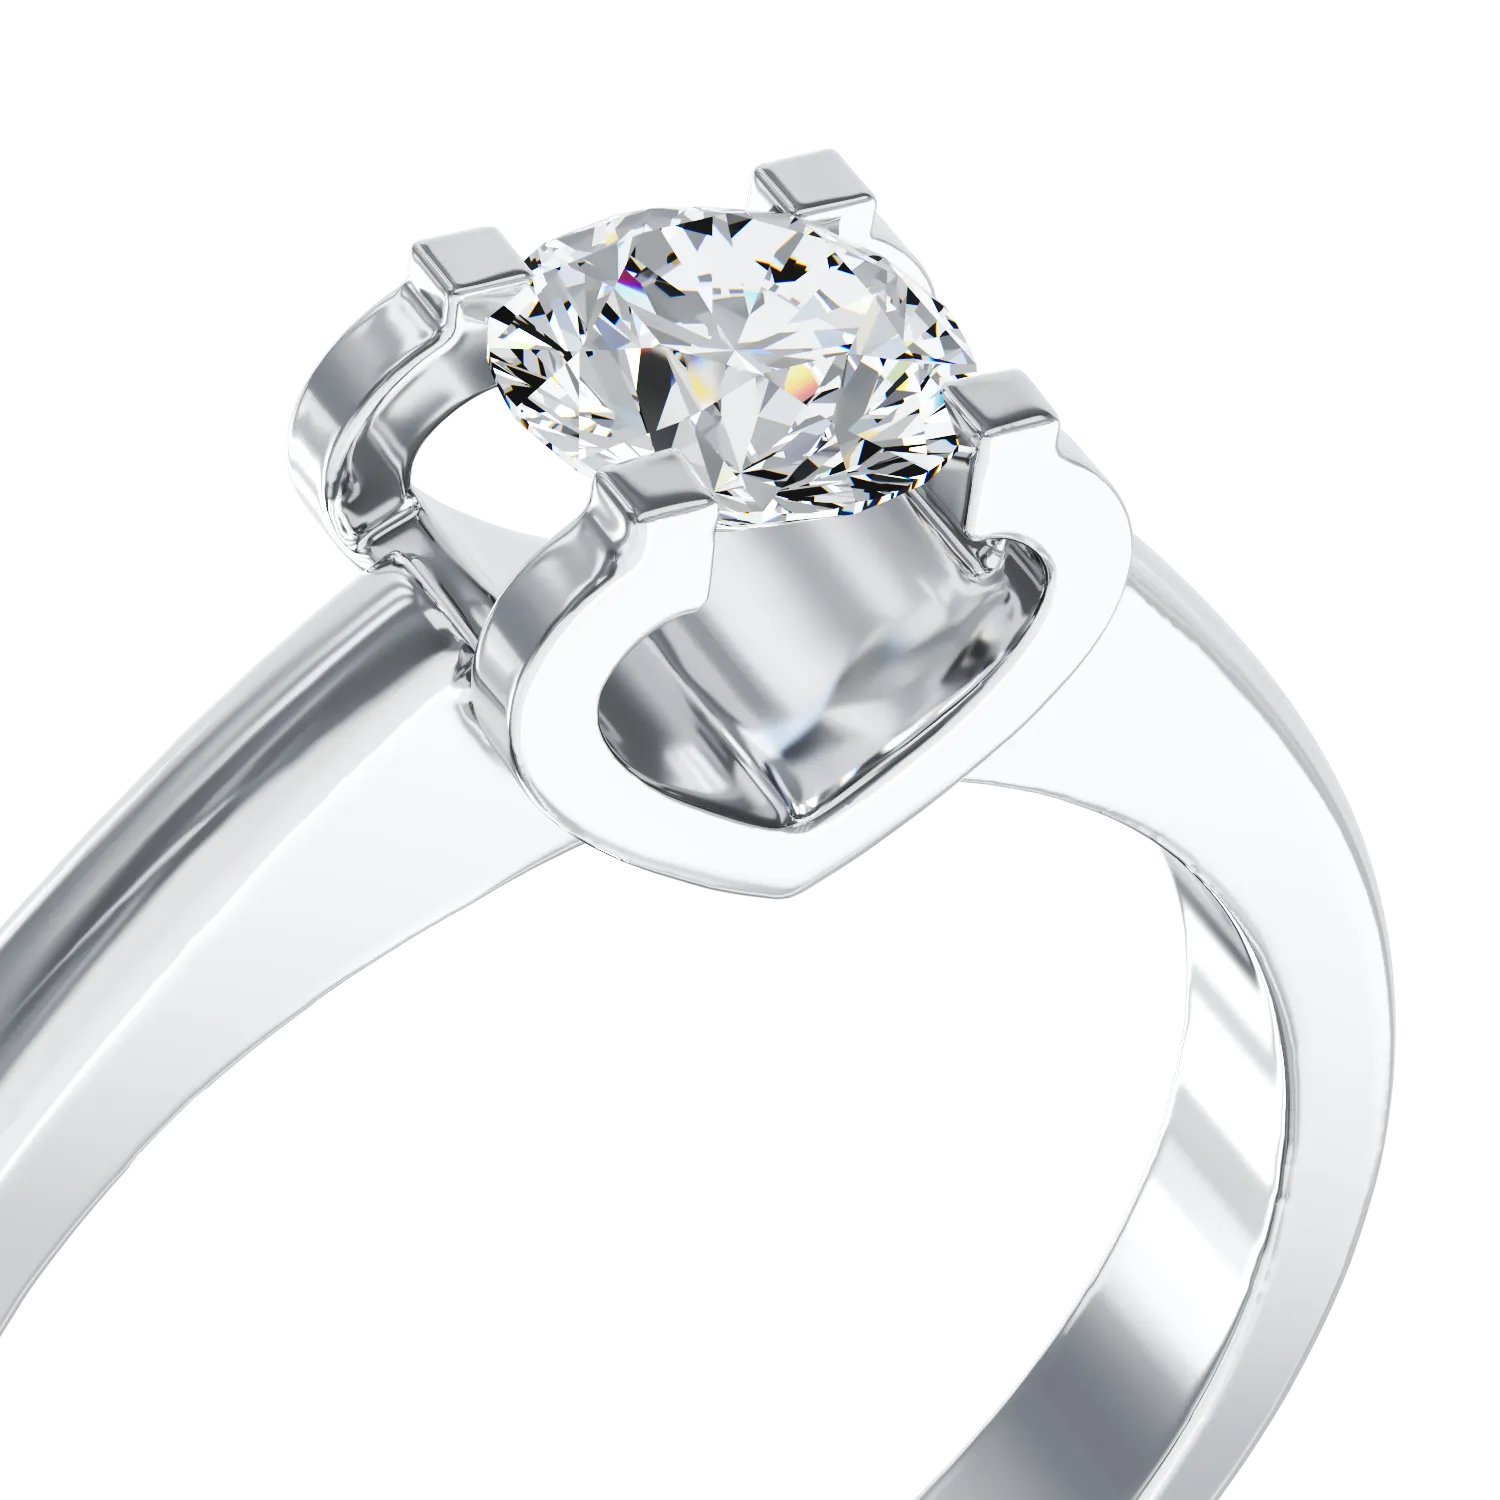 18K white gold engagement ring with 0.2ct solitaire diamond